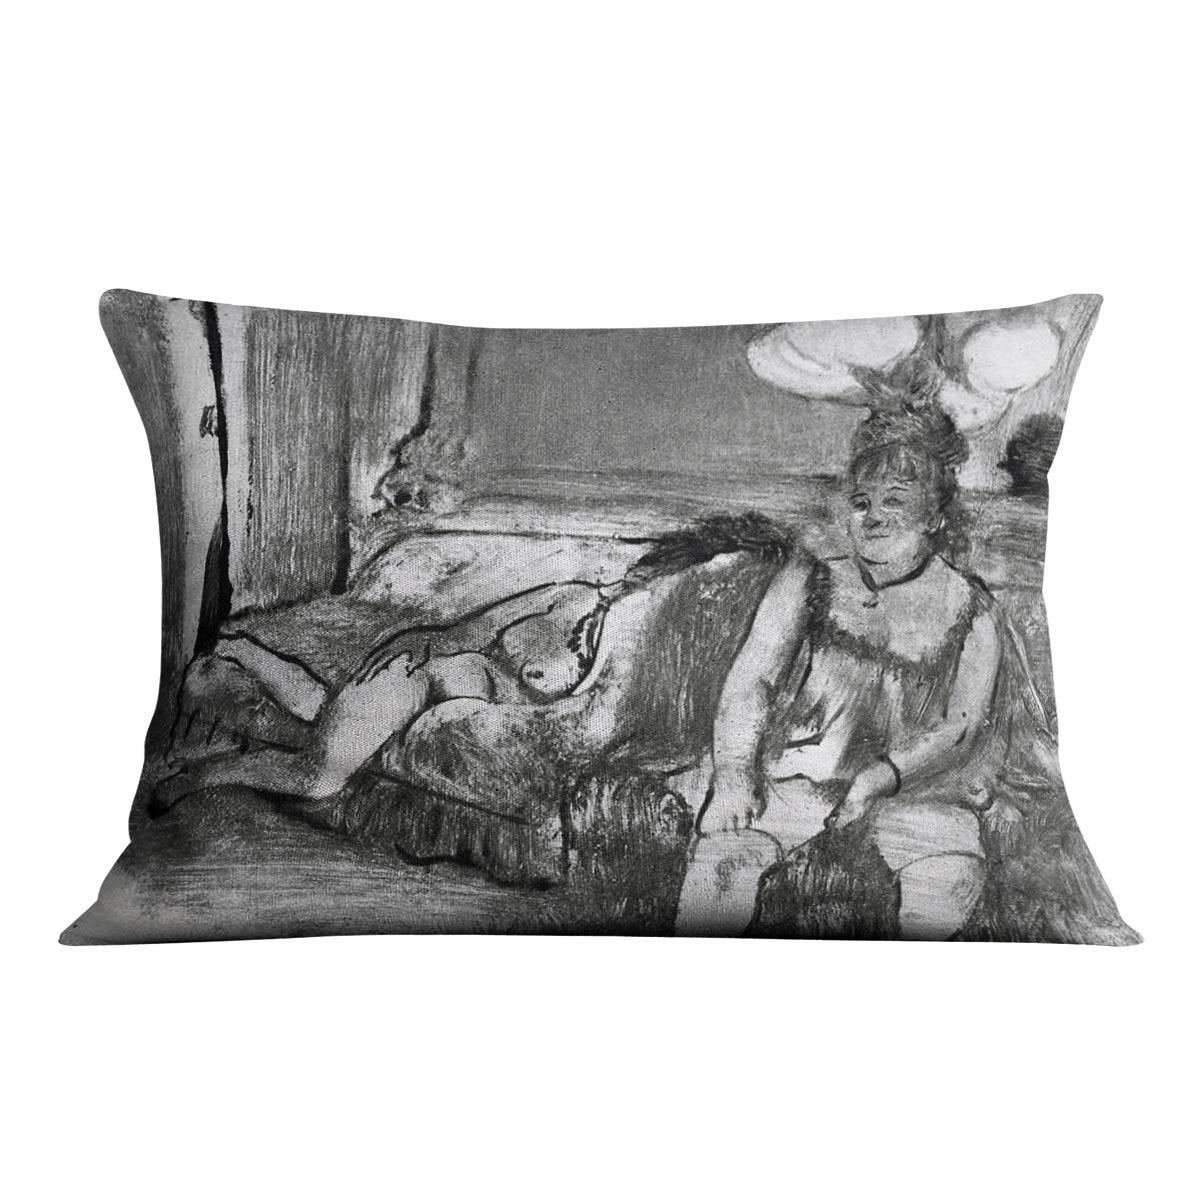 Taking a rest by Degas Cushion